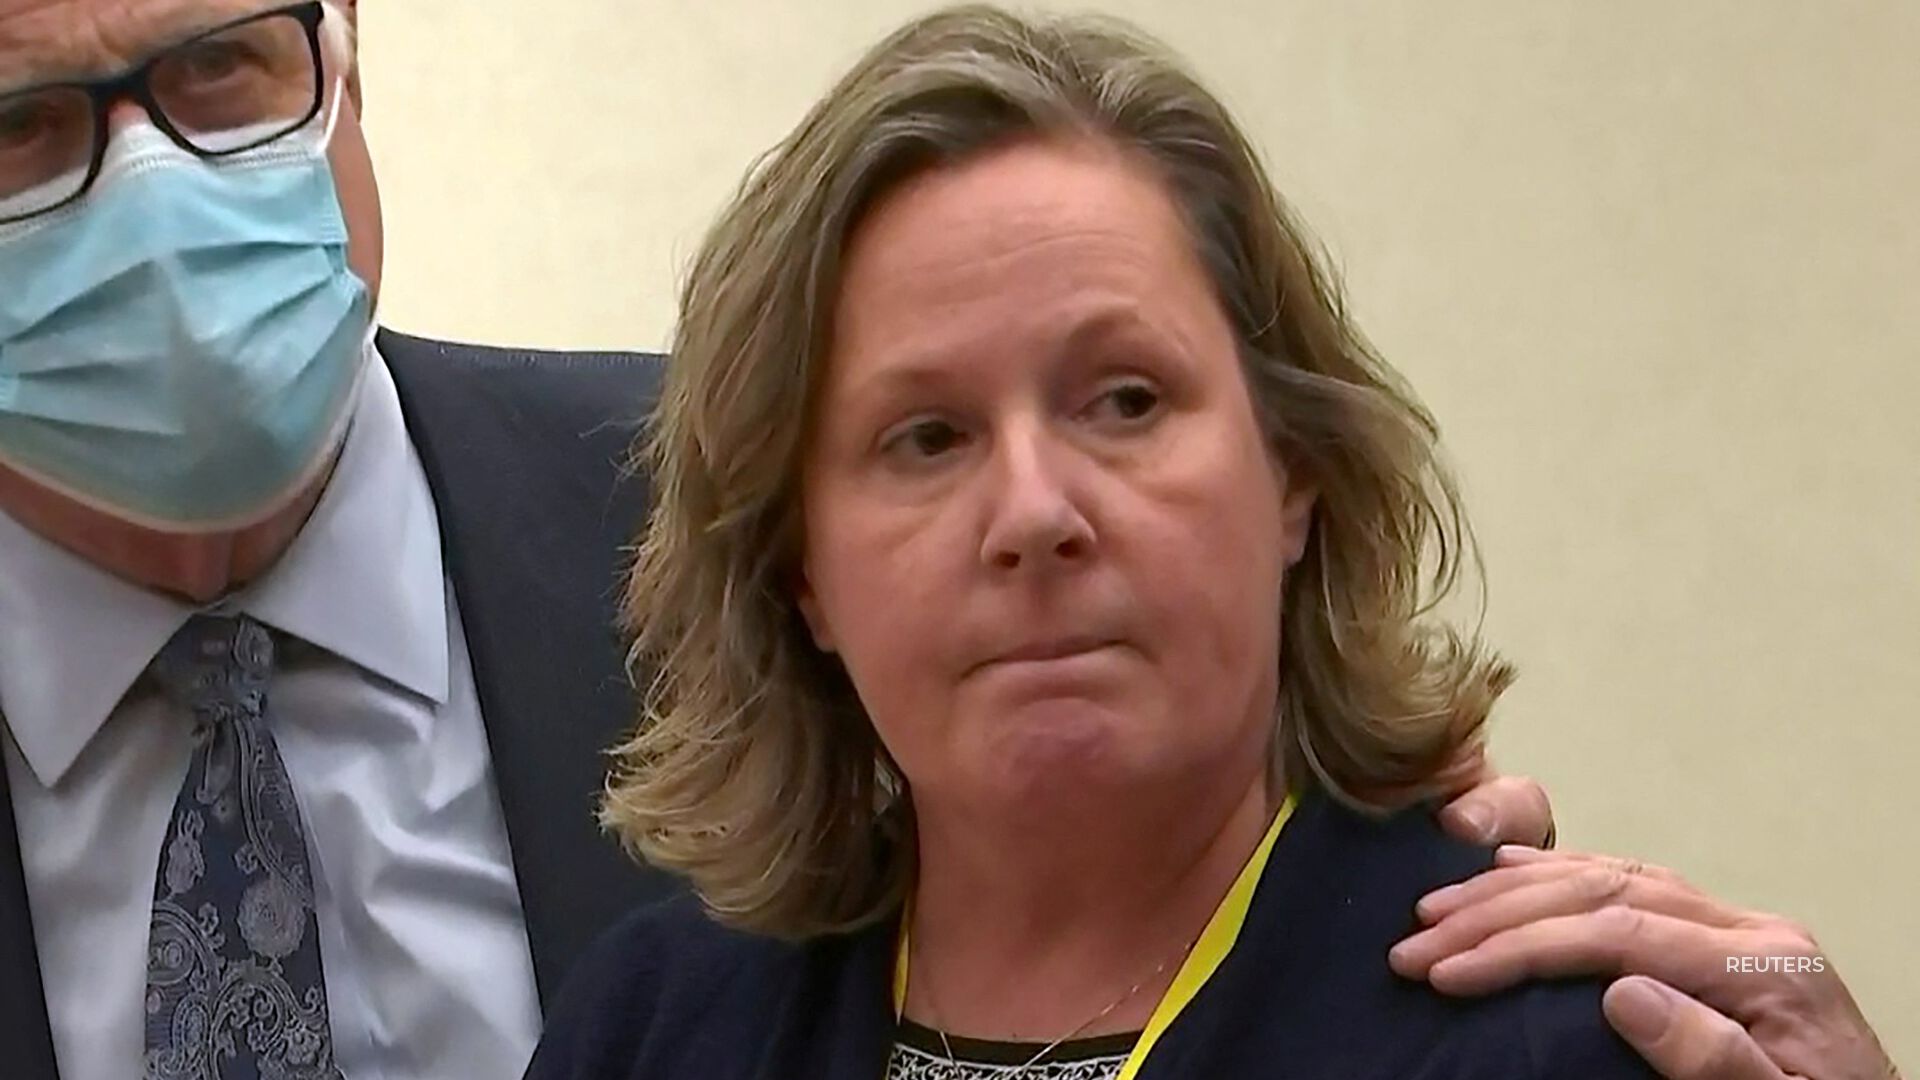 Kim Potter was found guilty of manslaughter in the slaying of Daunte Wright.